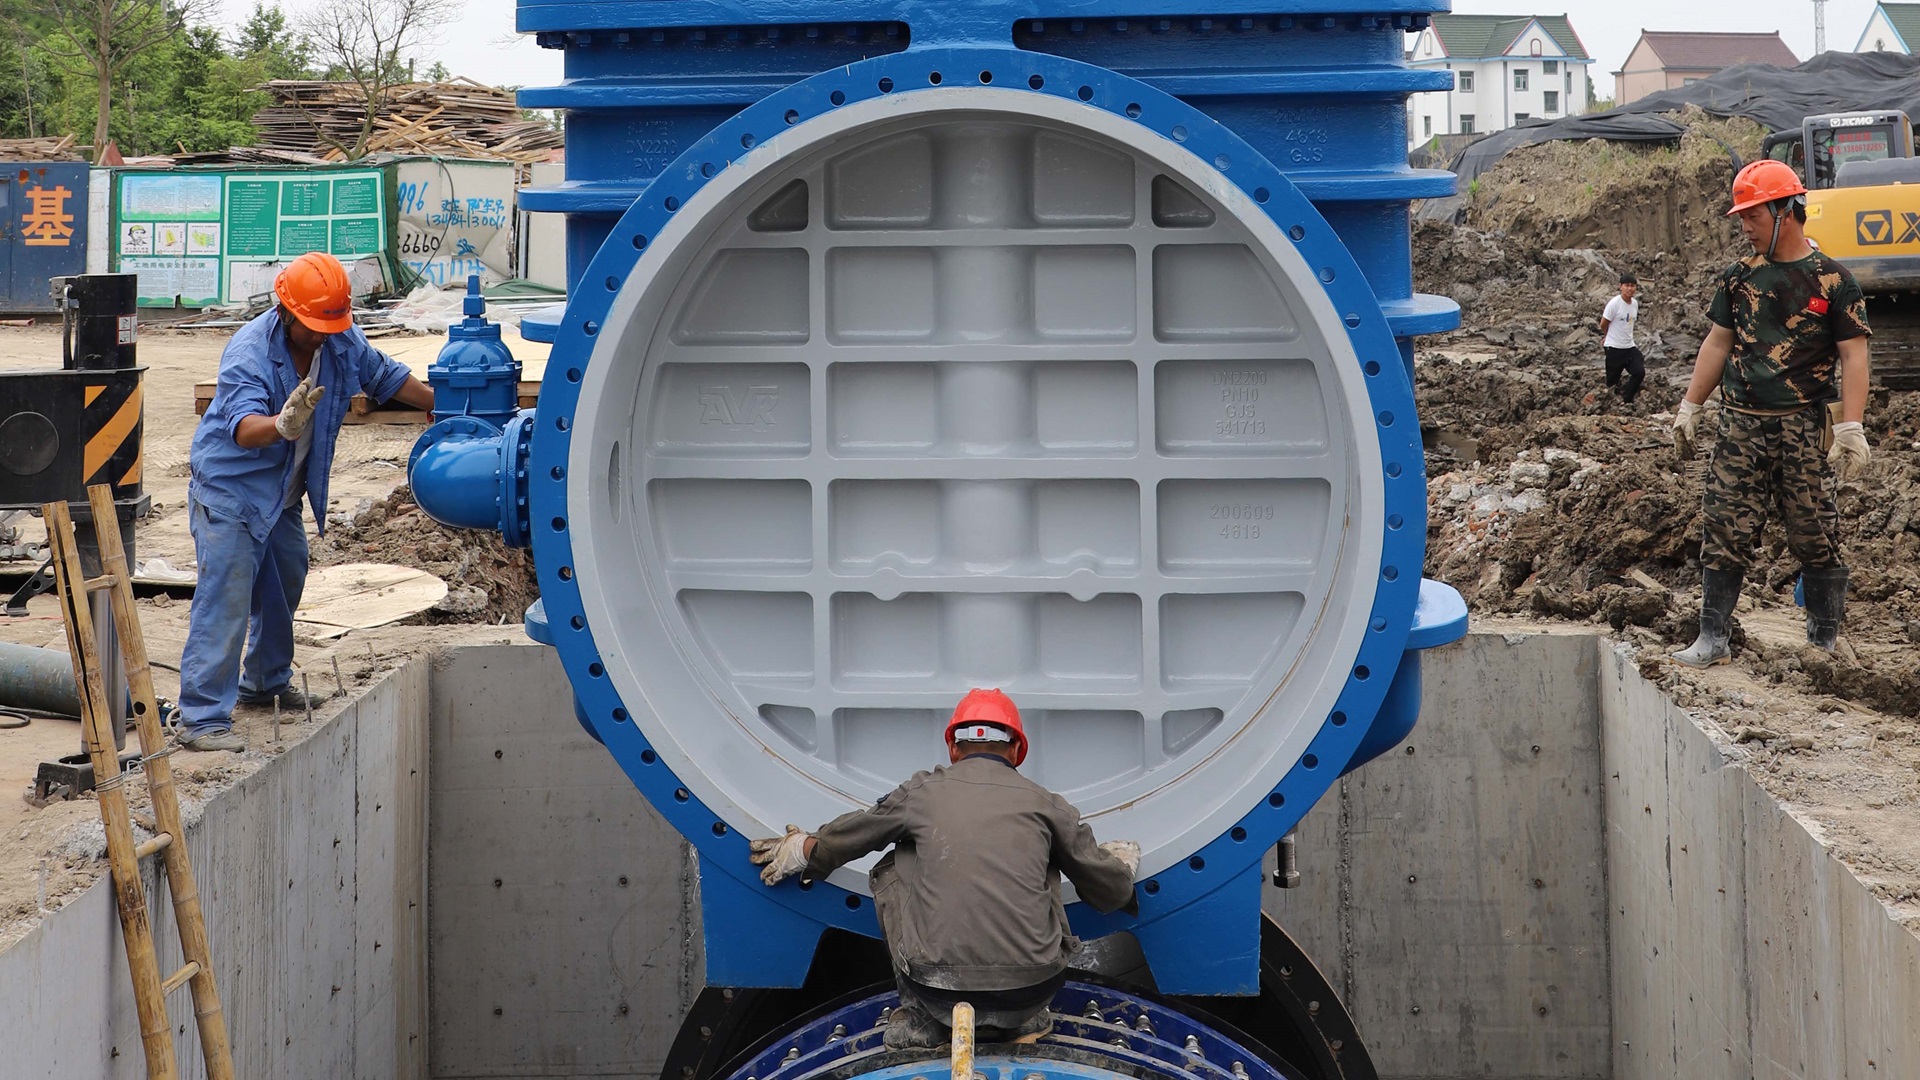 largest gate valve ever supplied by AVK has just been installed in a wastewater system in China